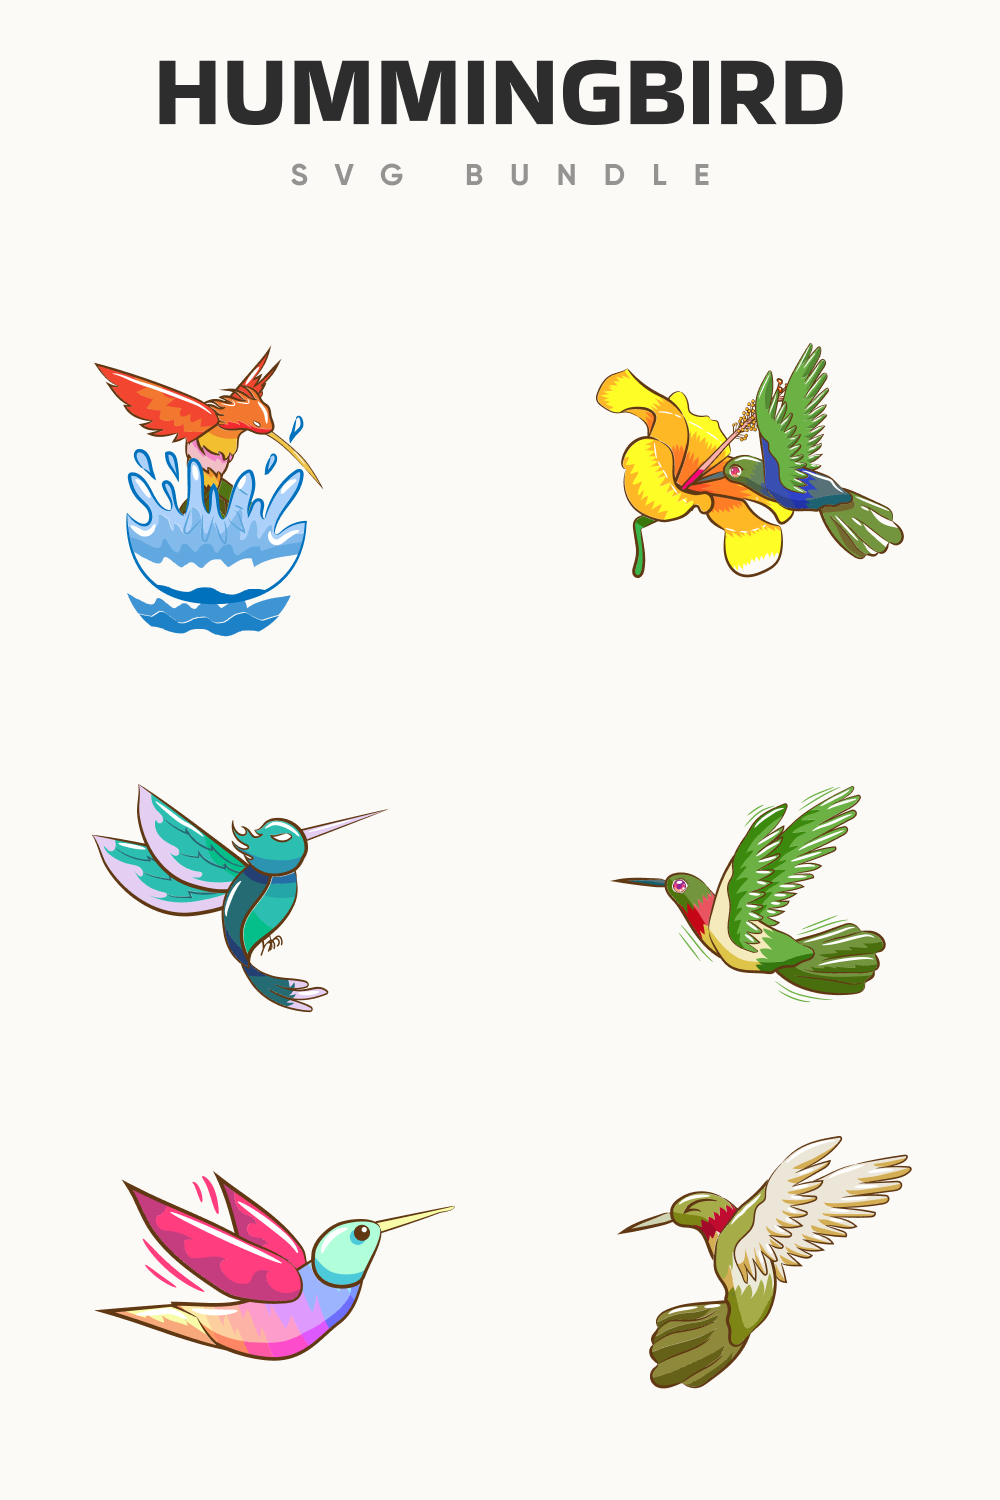 Bunch of birds that are flying in the air.